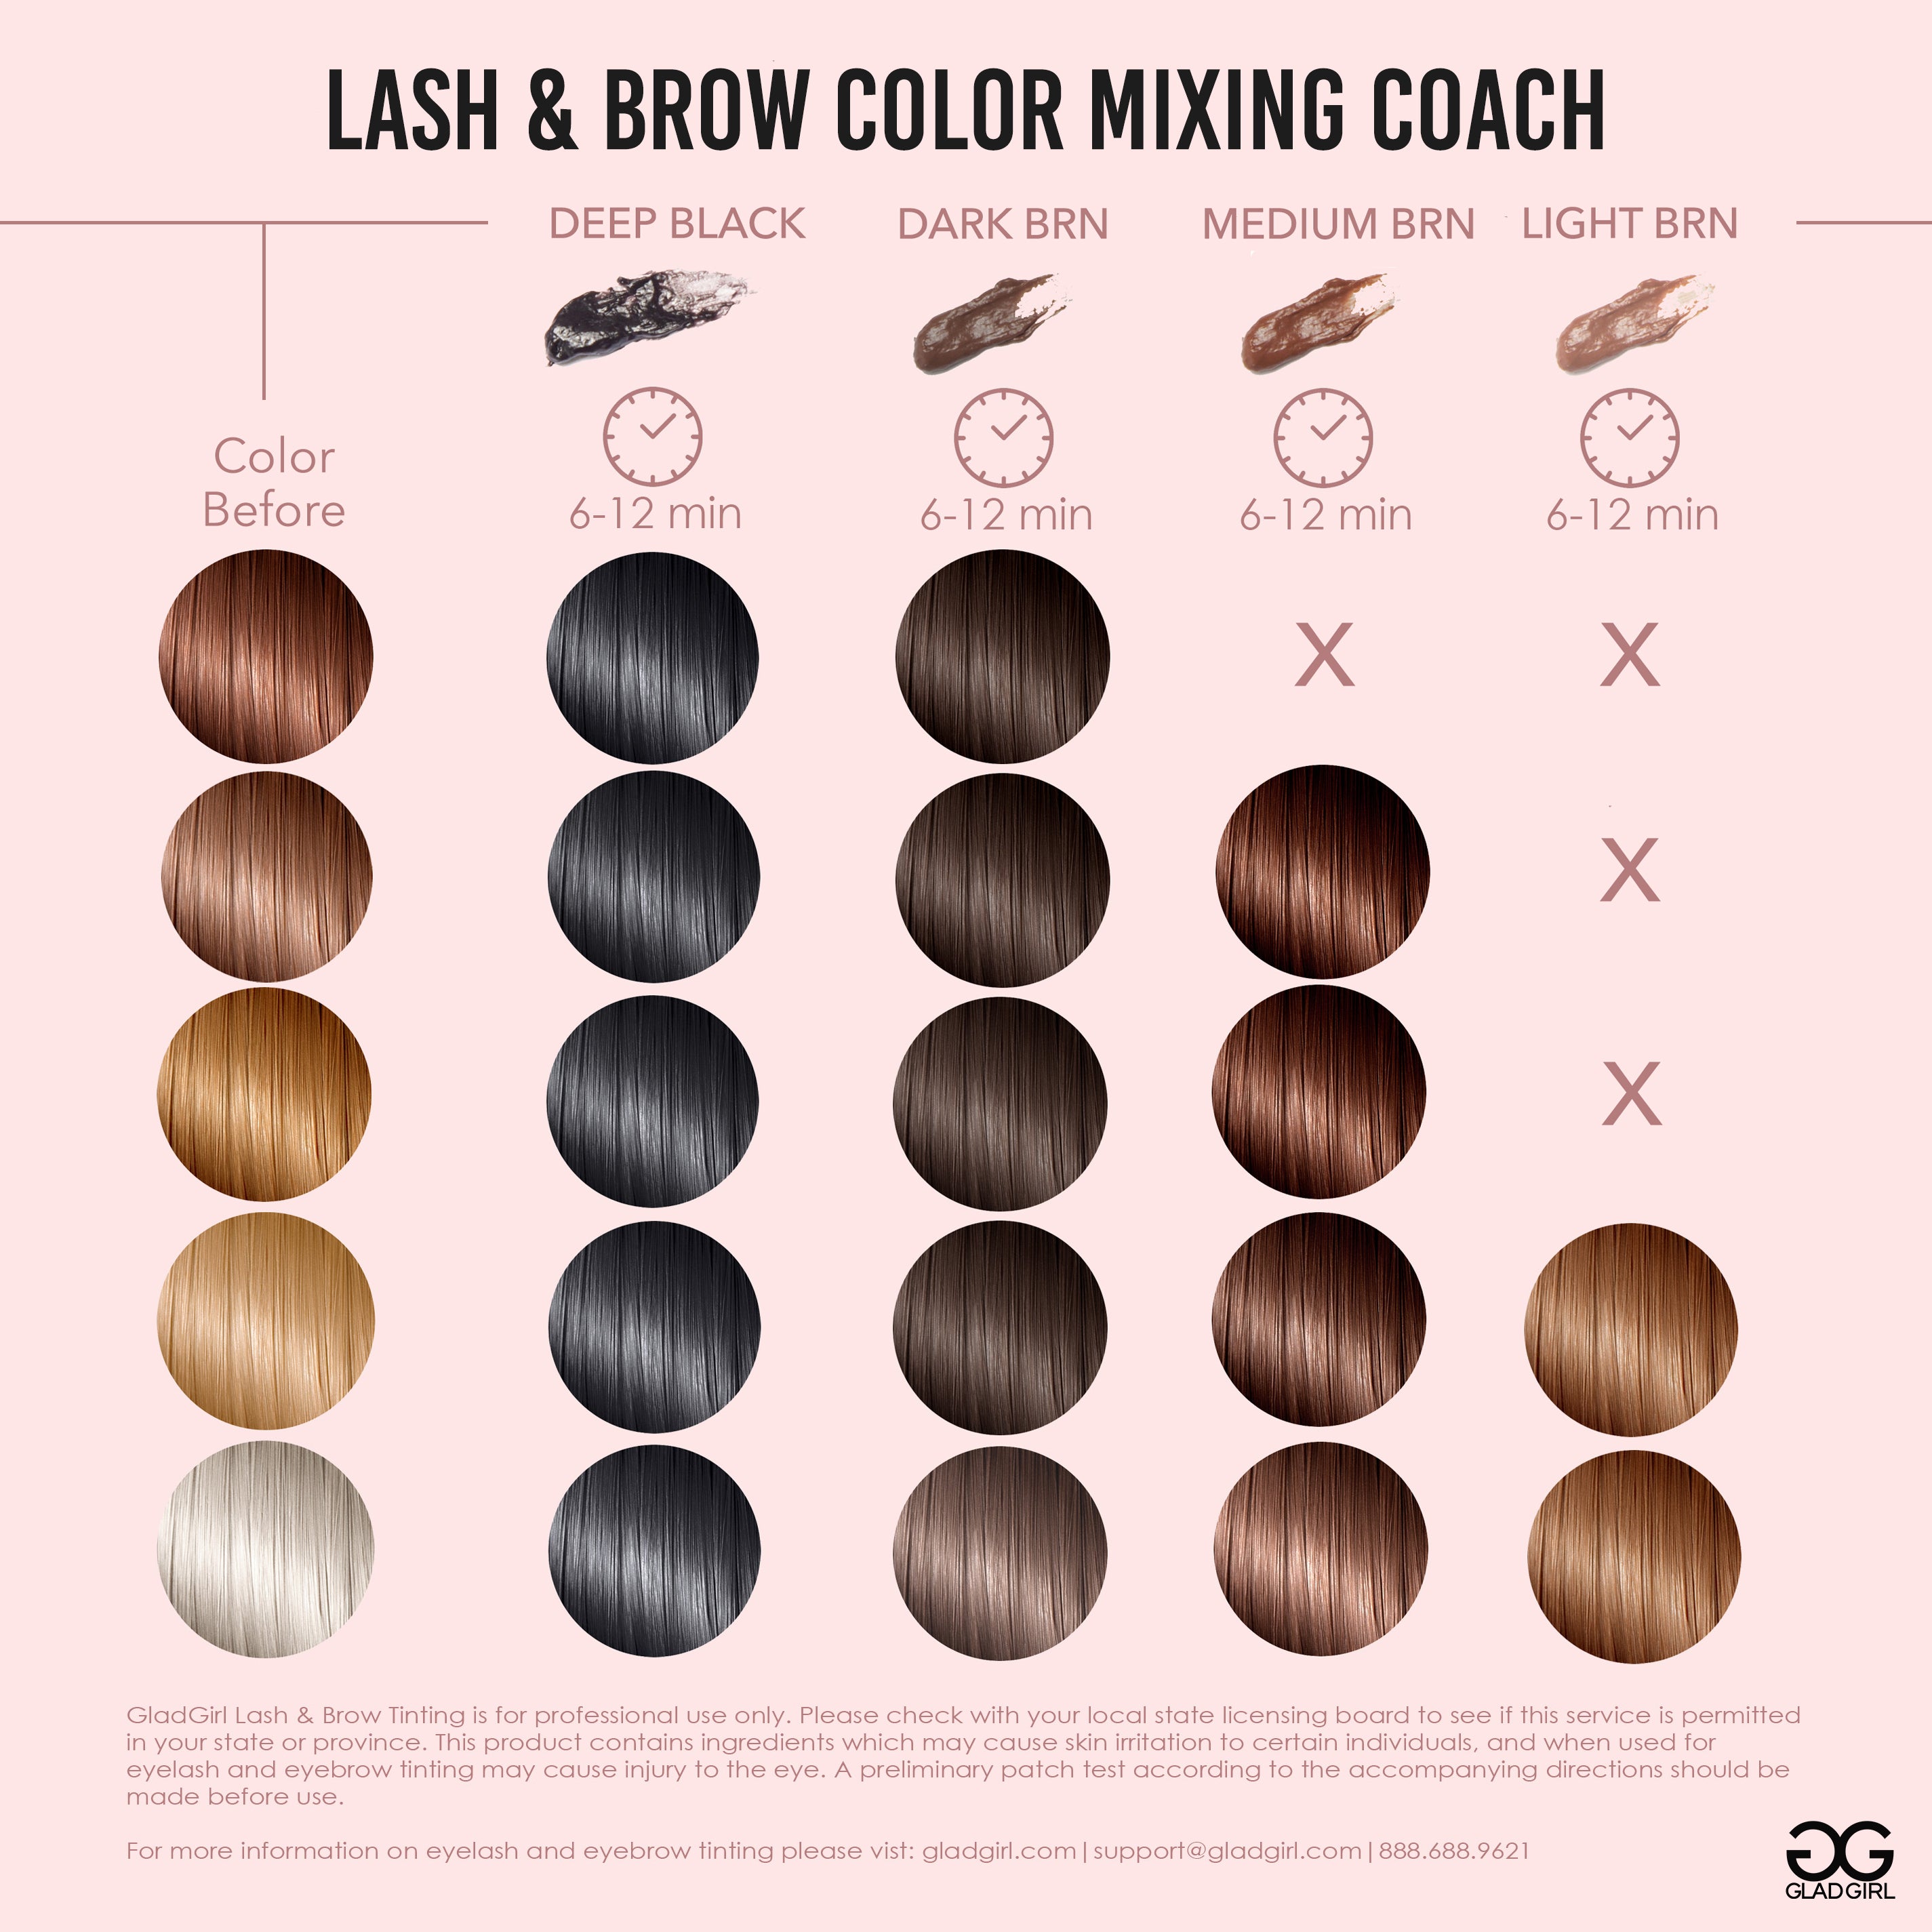 products/LashBrowColorMixing.jpg